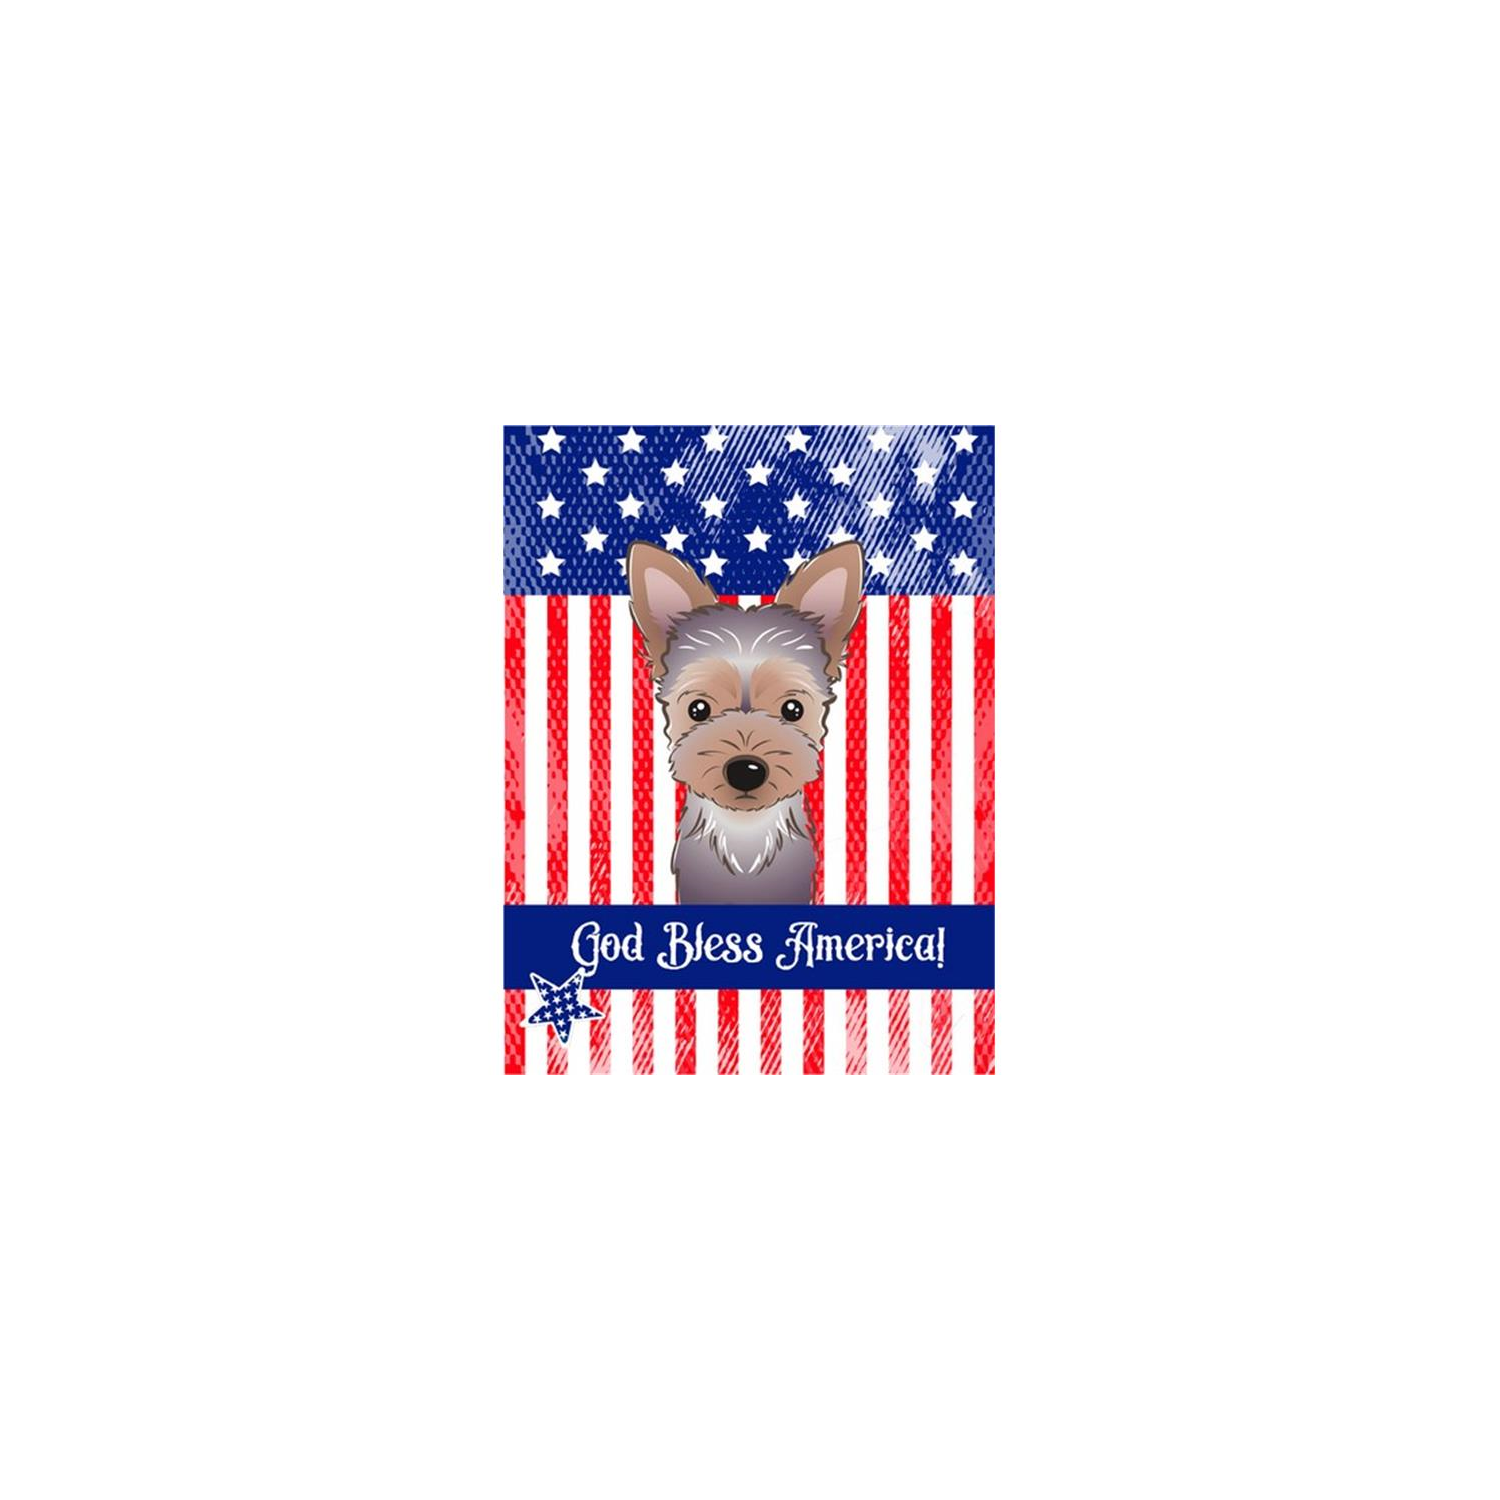 Carolines Treasures BB2162CHF God Bless American Flag with Yorkie Puppy Canvas House Flag